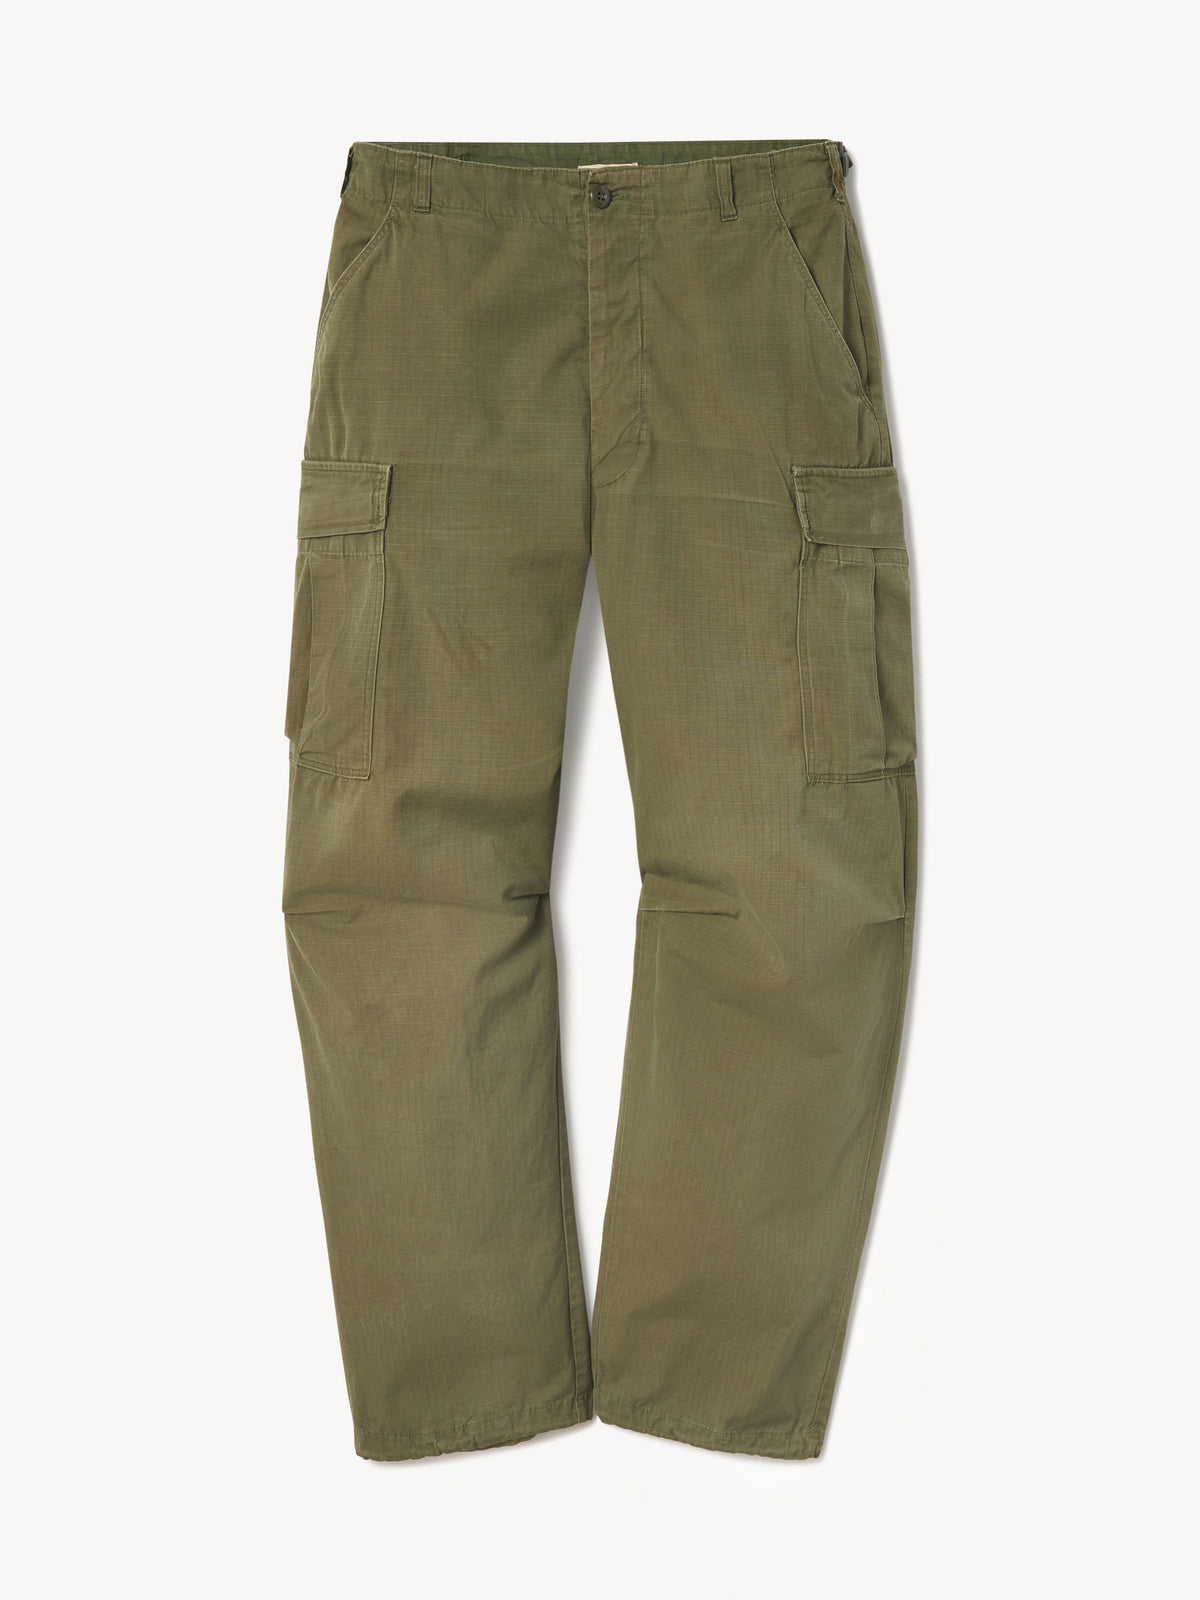 OG-107 Ripstop Cargo - 0143 - Product Flat